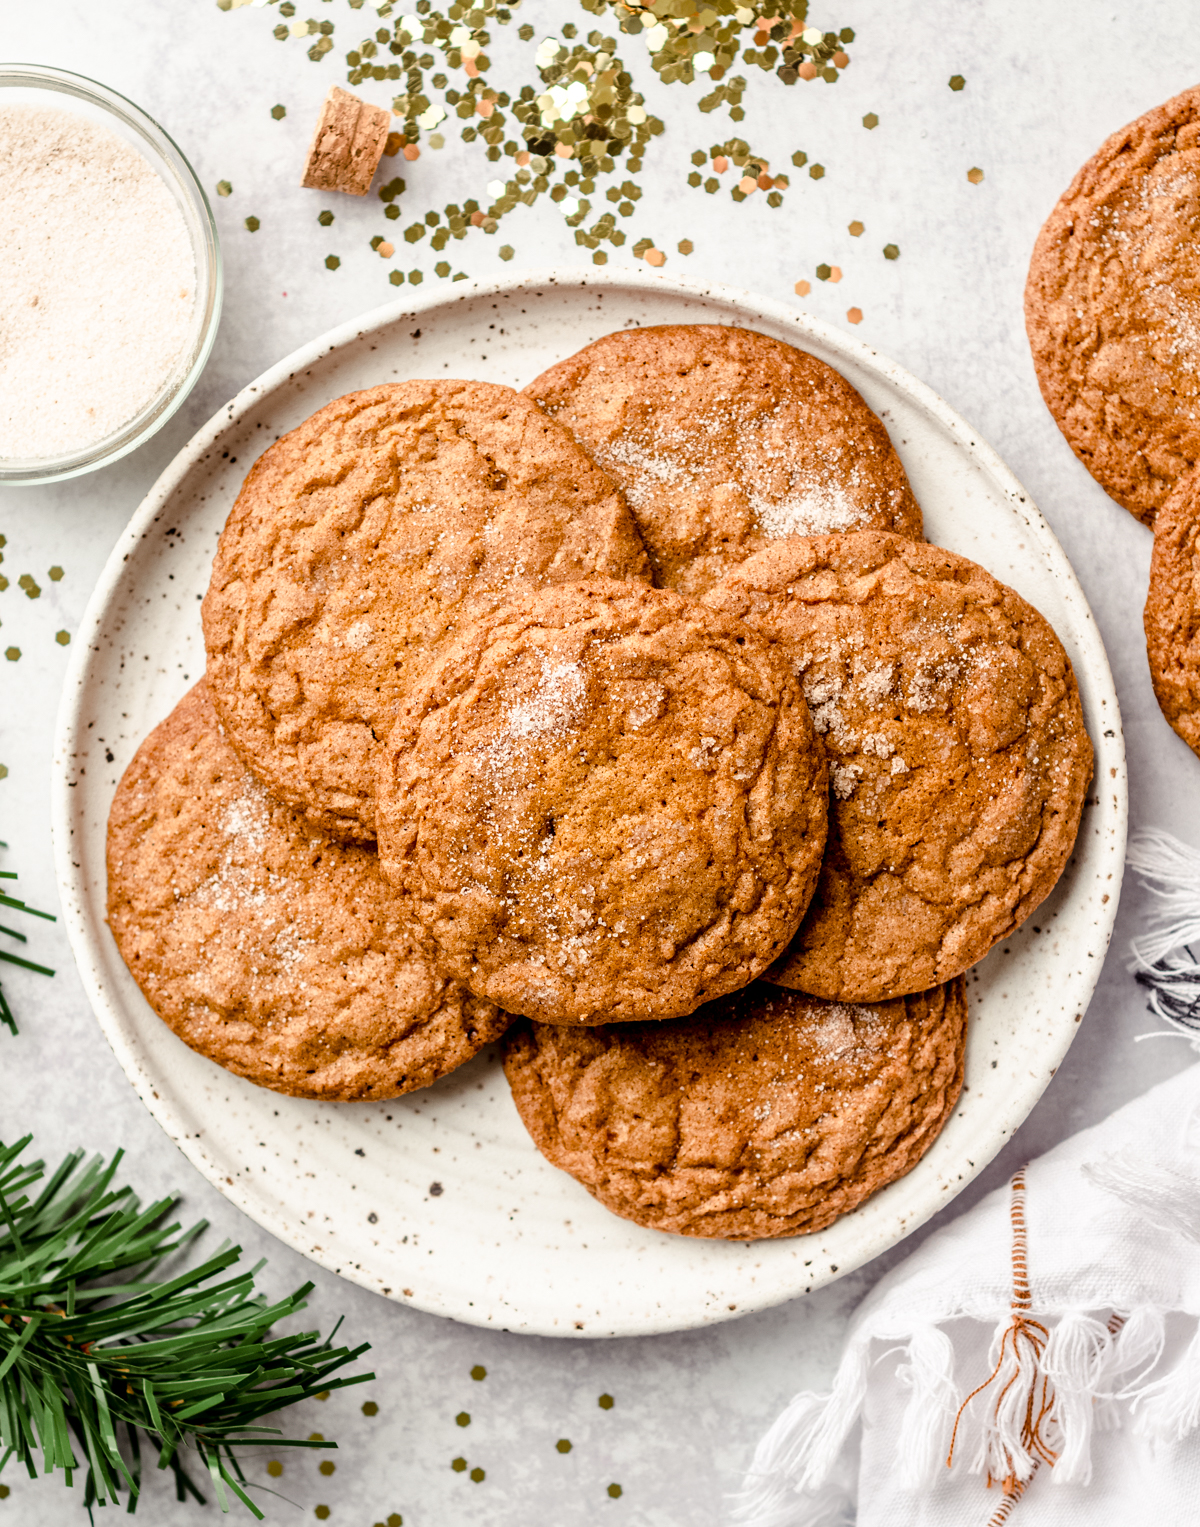 Aerial photo of crispy gingersnap cookies on a plate with gold confetti, evergreen sprigs, and a bowl of spiced sugar around it.